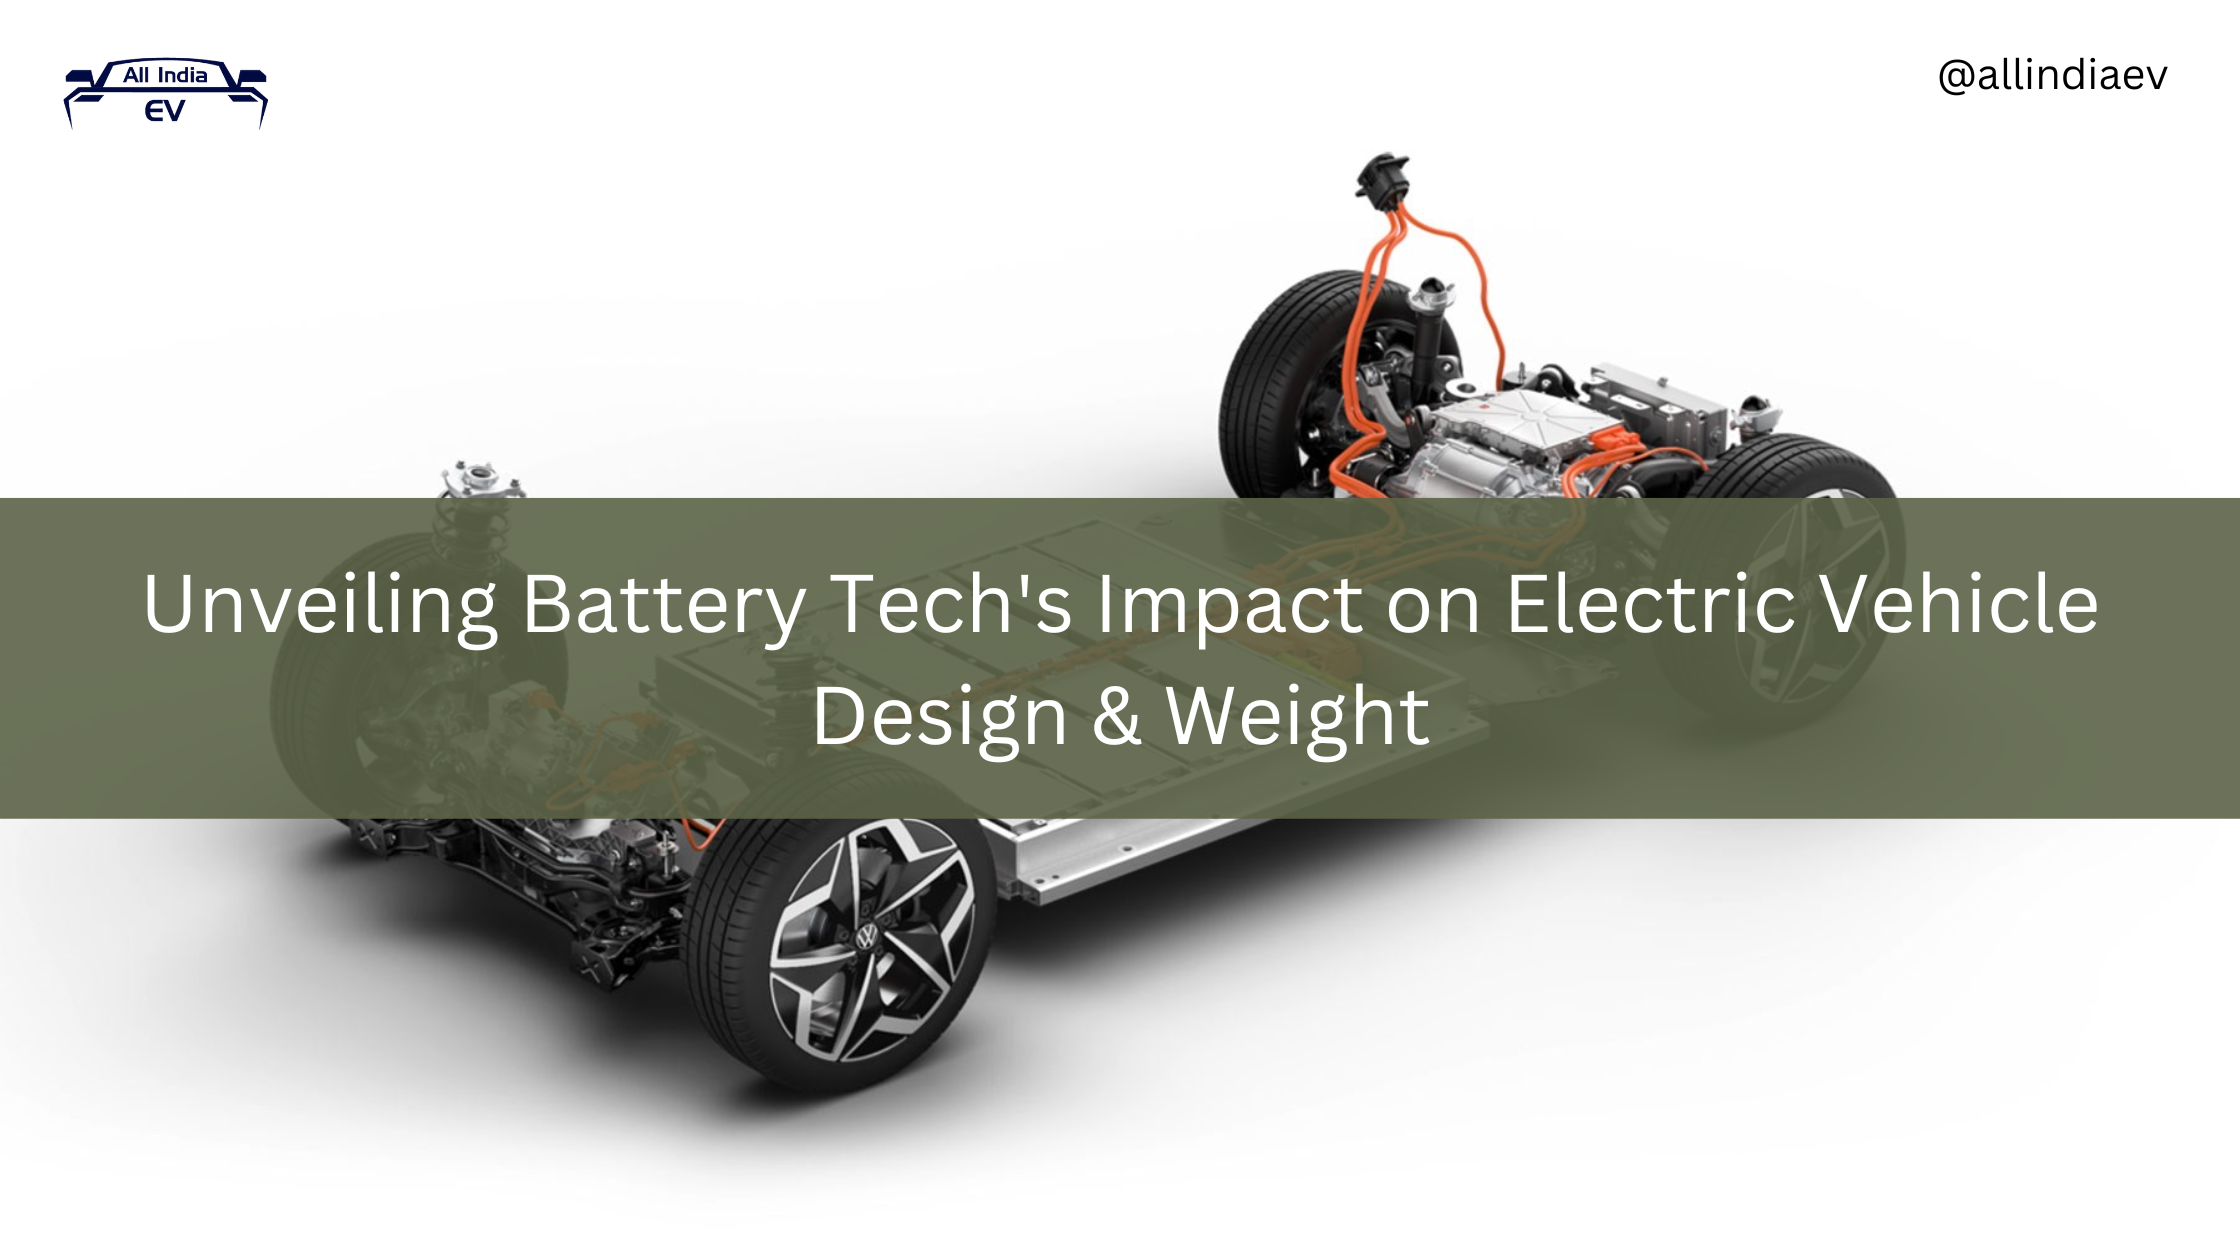 Unveiling Battery Tech's Impact on Electric Vehicle Design & Weight